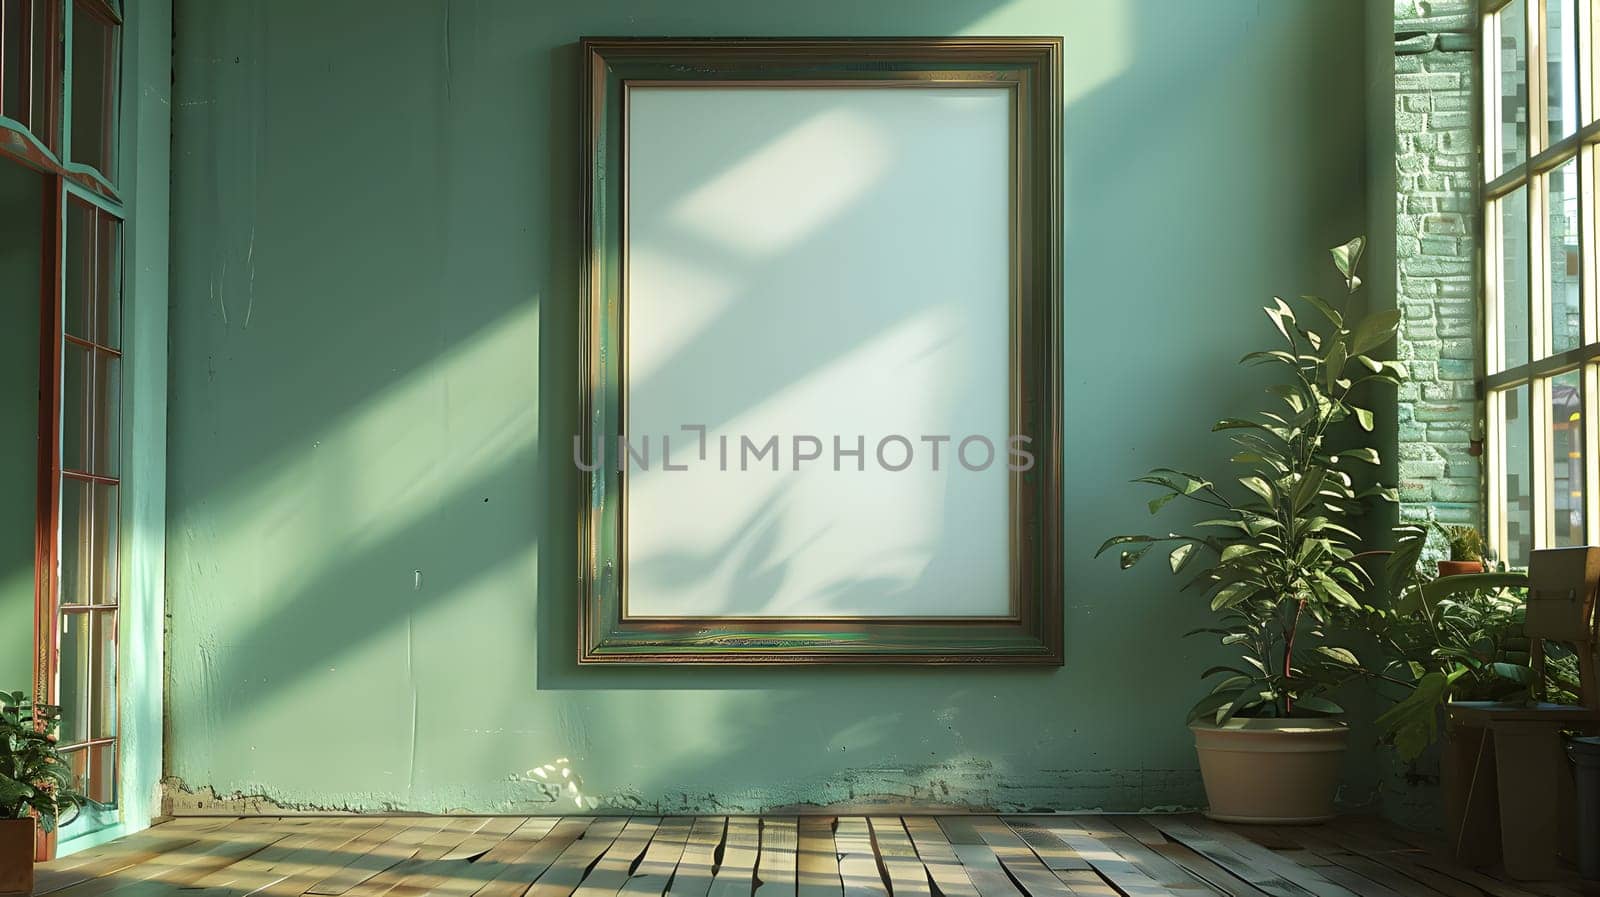 A rectangular picture frame is hanging on a green wall in a room with plantfilled flowerpots, colorful tints and shades, and glass windows